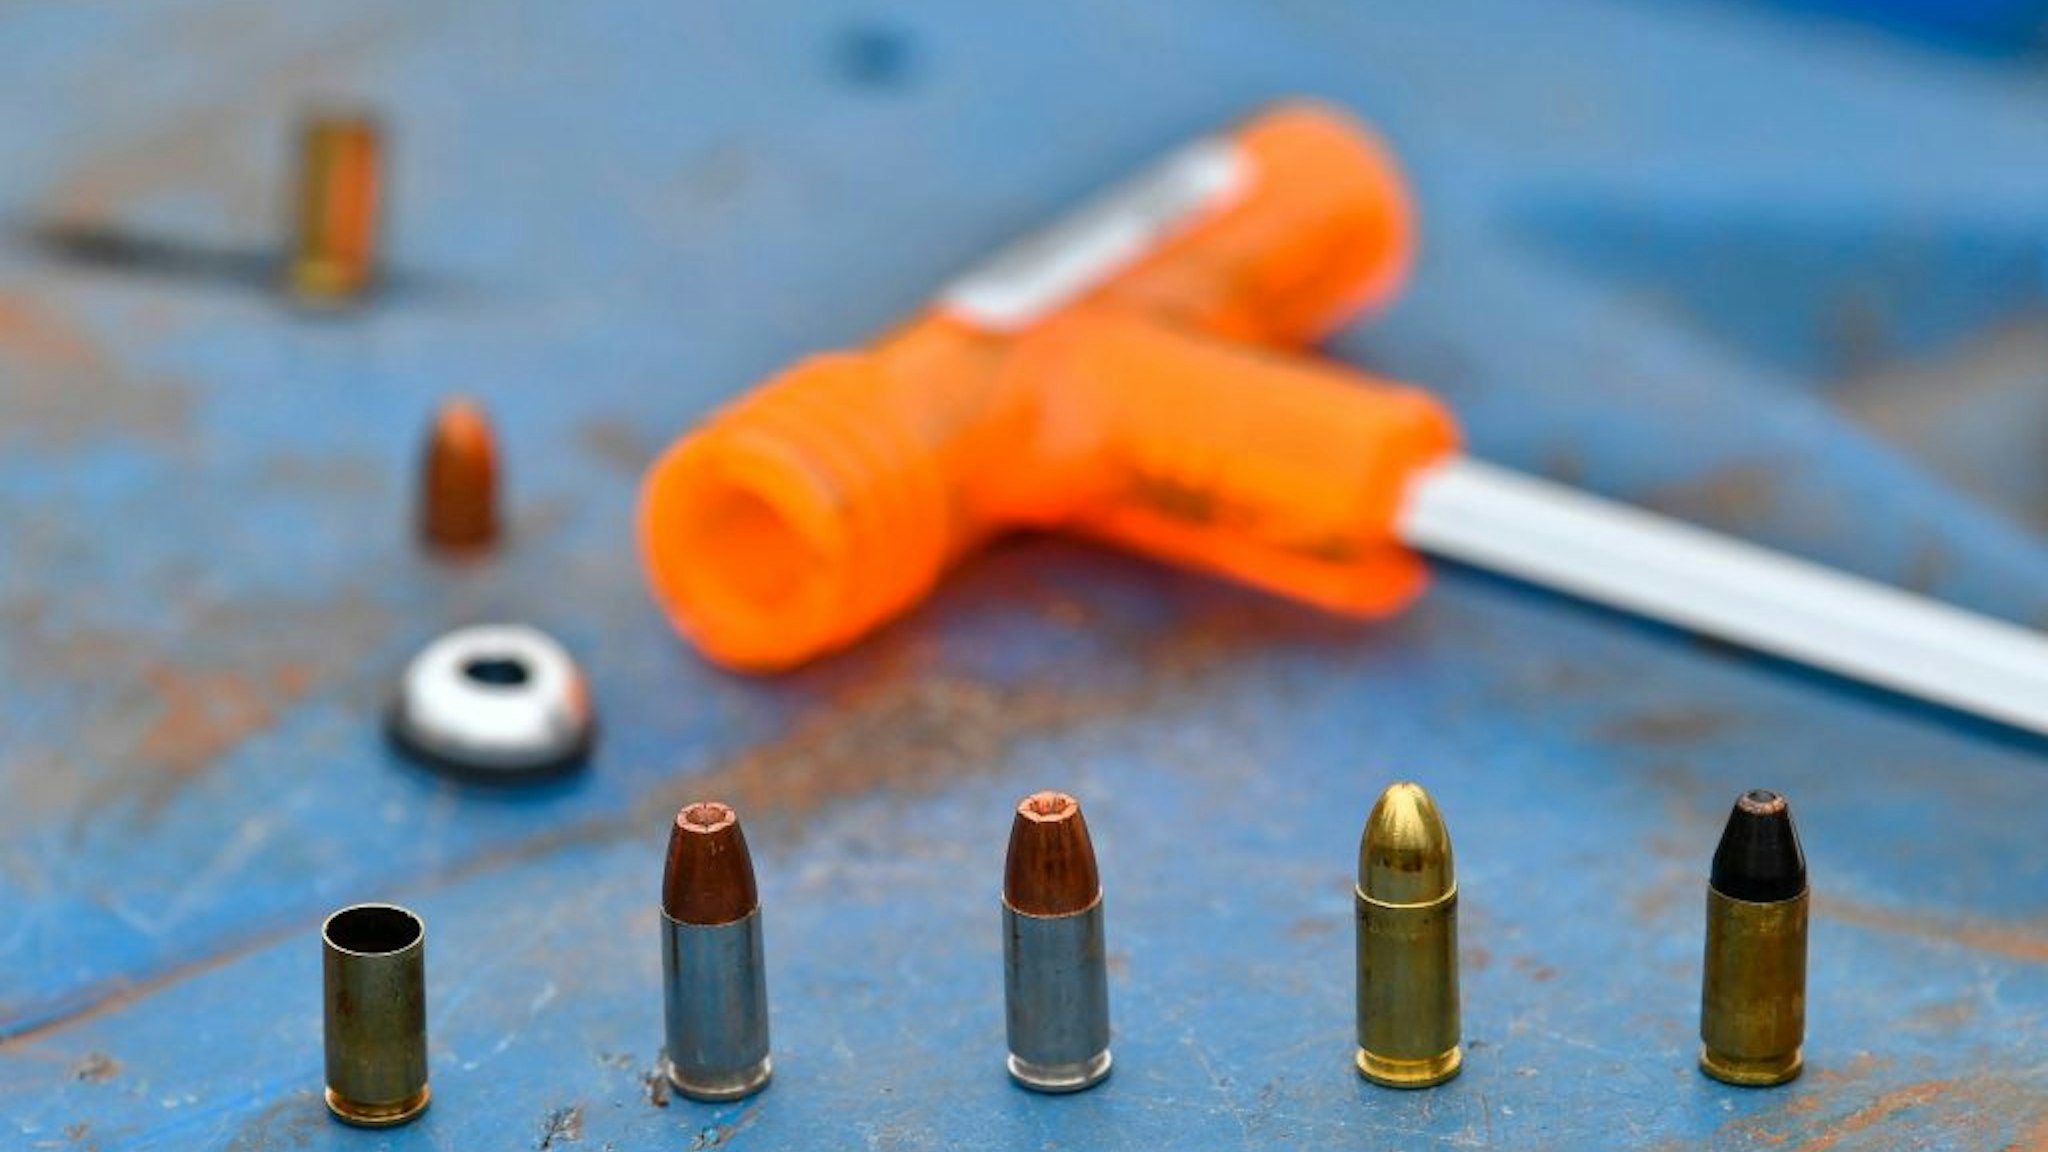 9mm. rounds, including the catridge of a decoupled bullet, wait to be loaded into a hand-held pistol at a firing range to demosntrate the inert effect of the separated-bullet when fired at Kenya's National Gun Owners Association